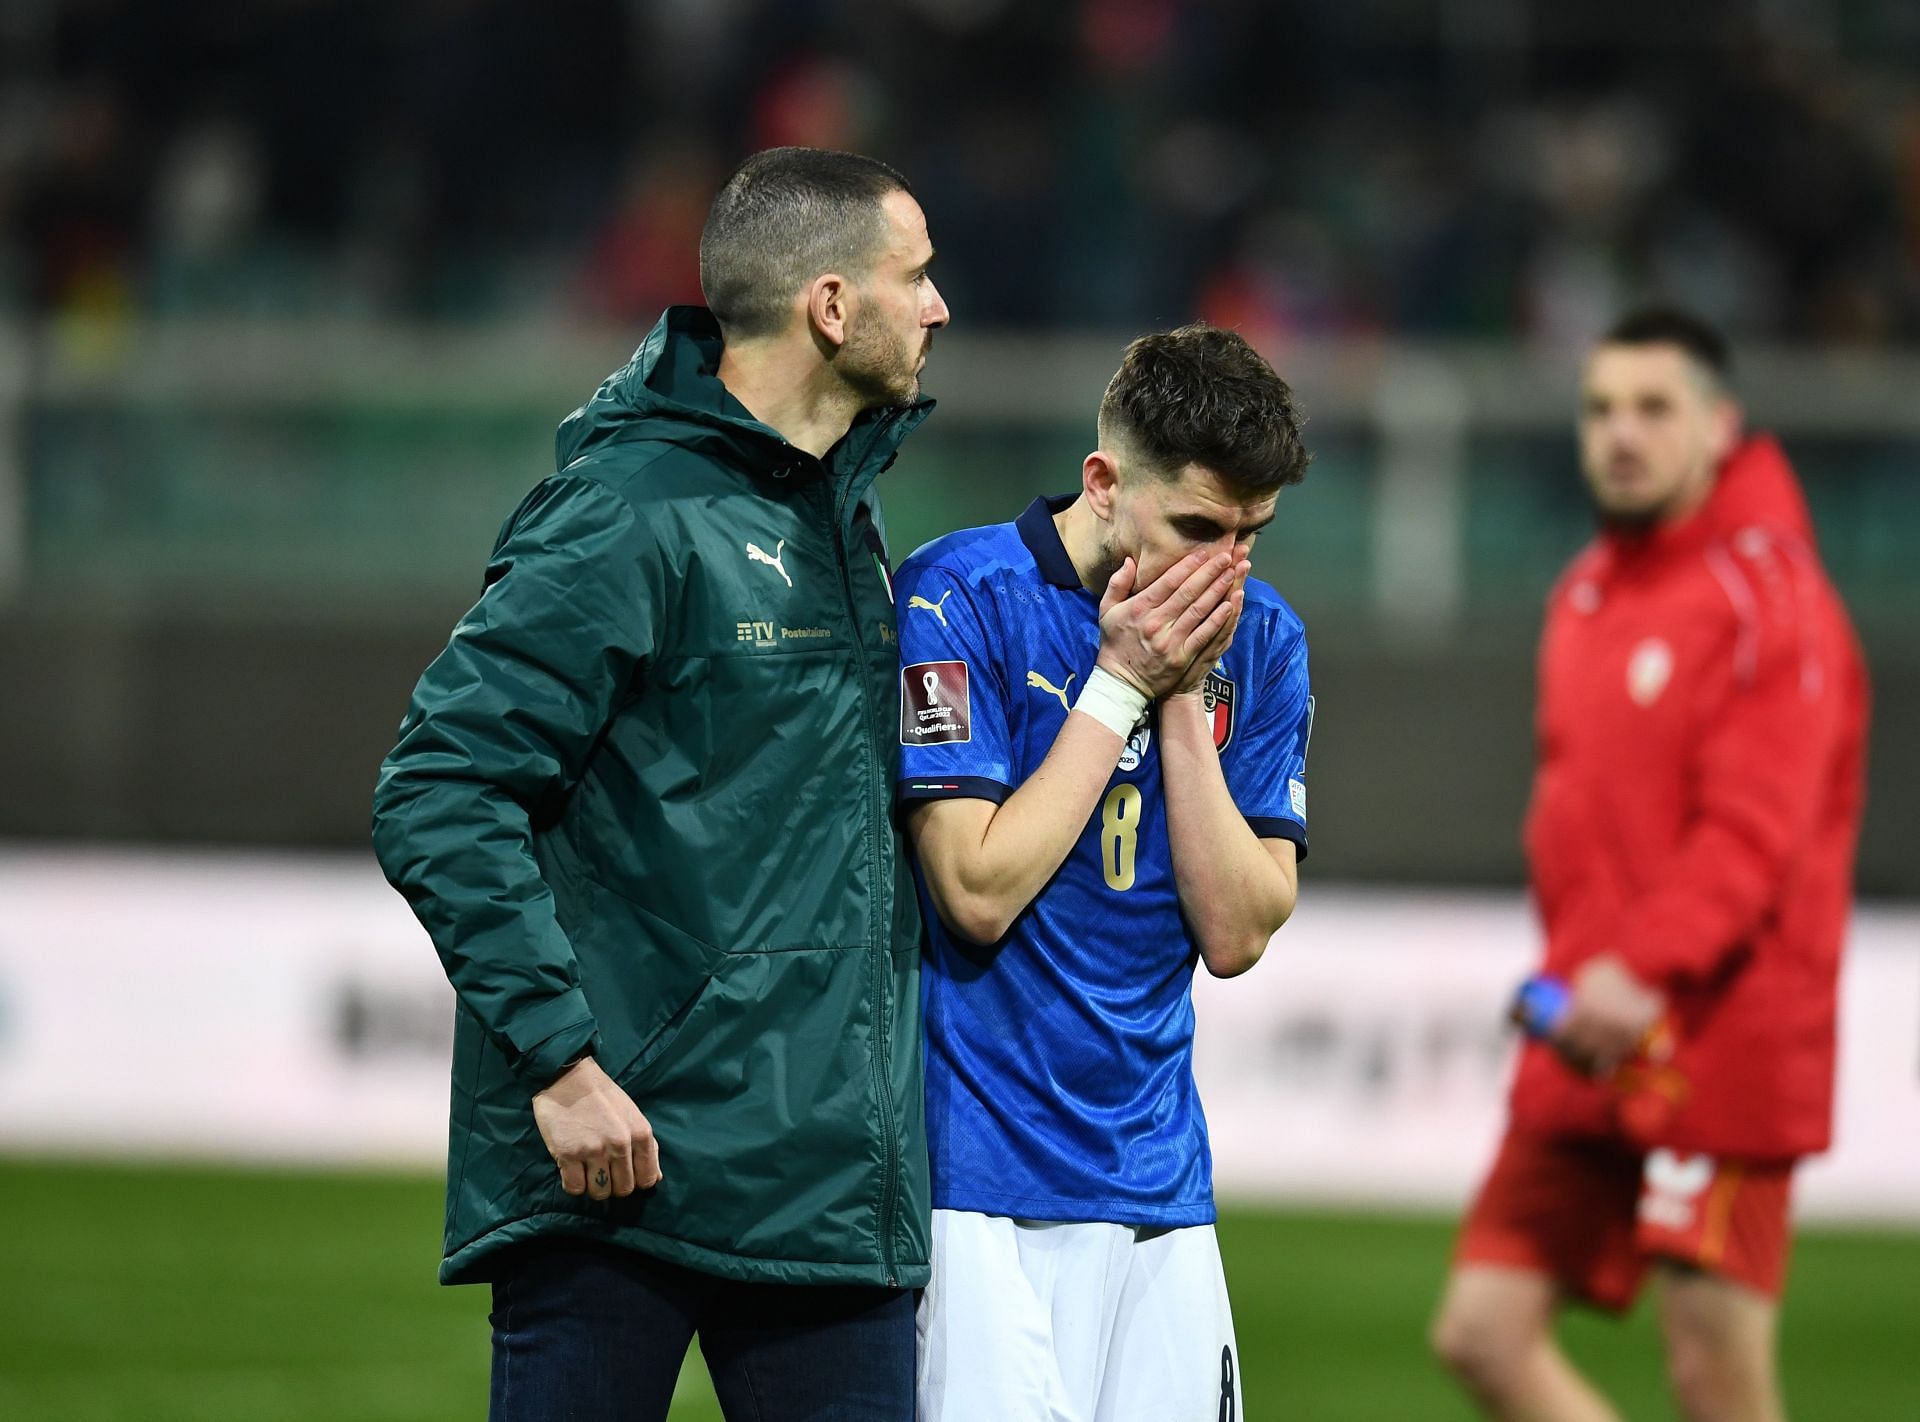 Italy were knocked out of World Cup qualification by North Macedonia